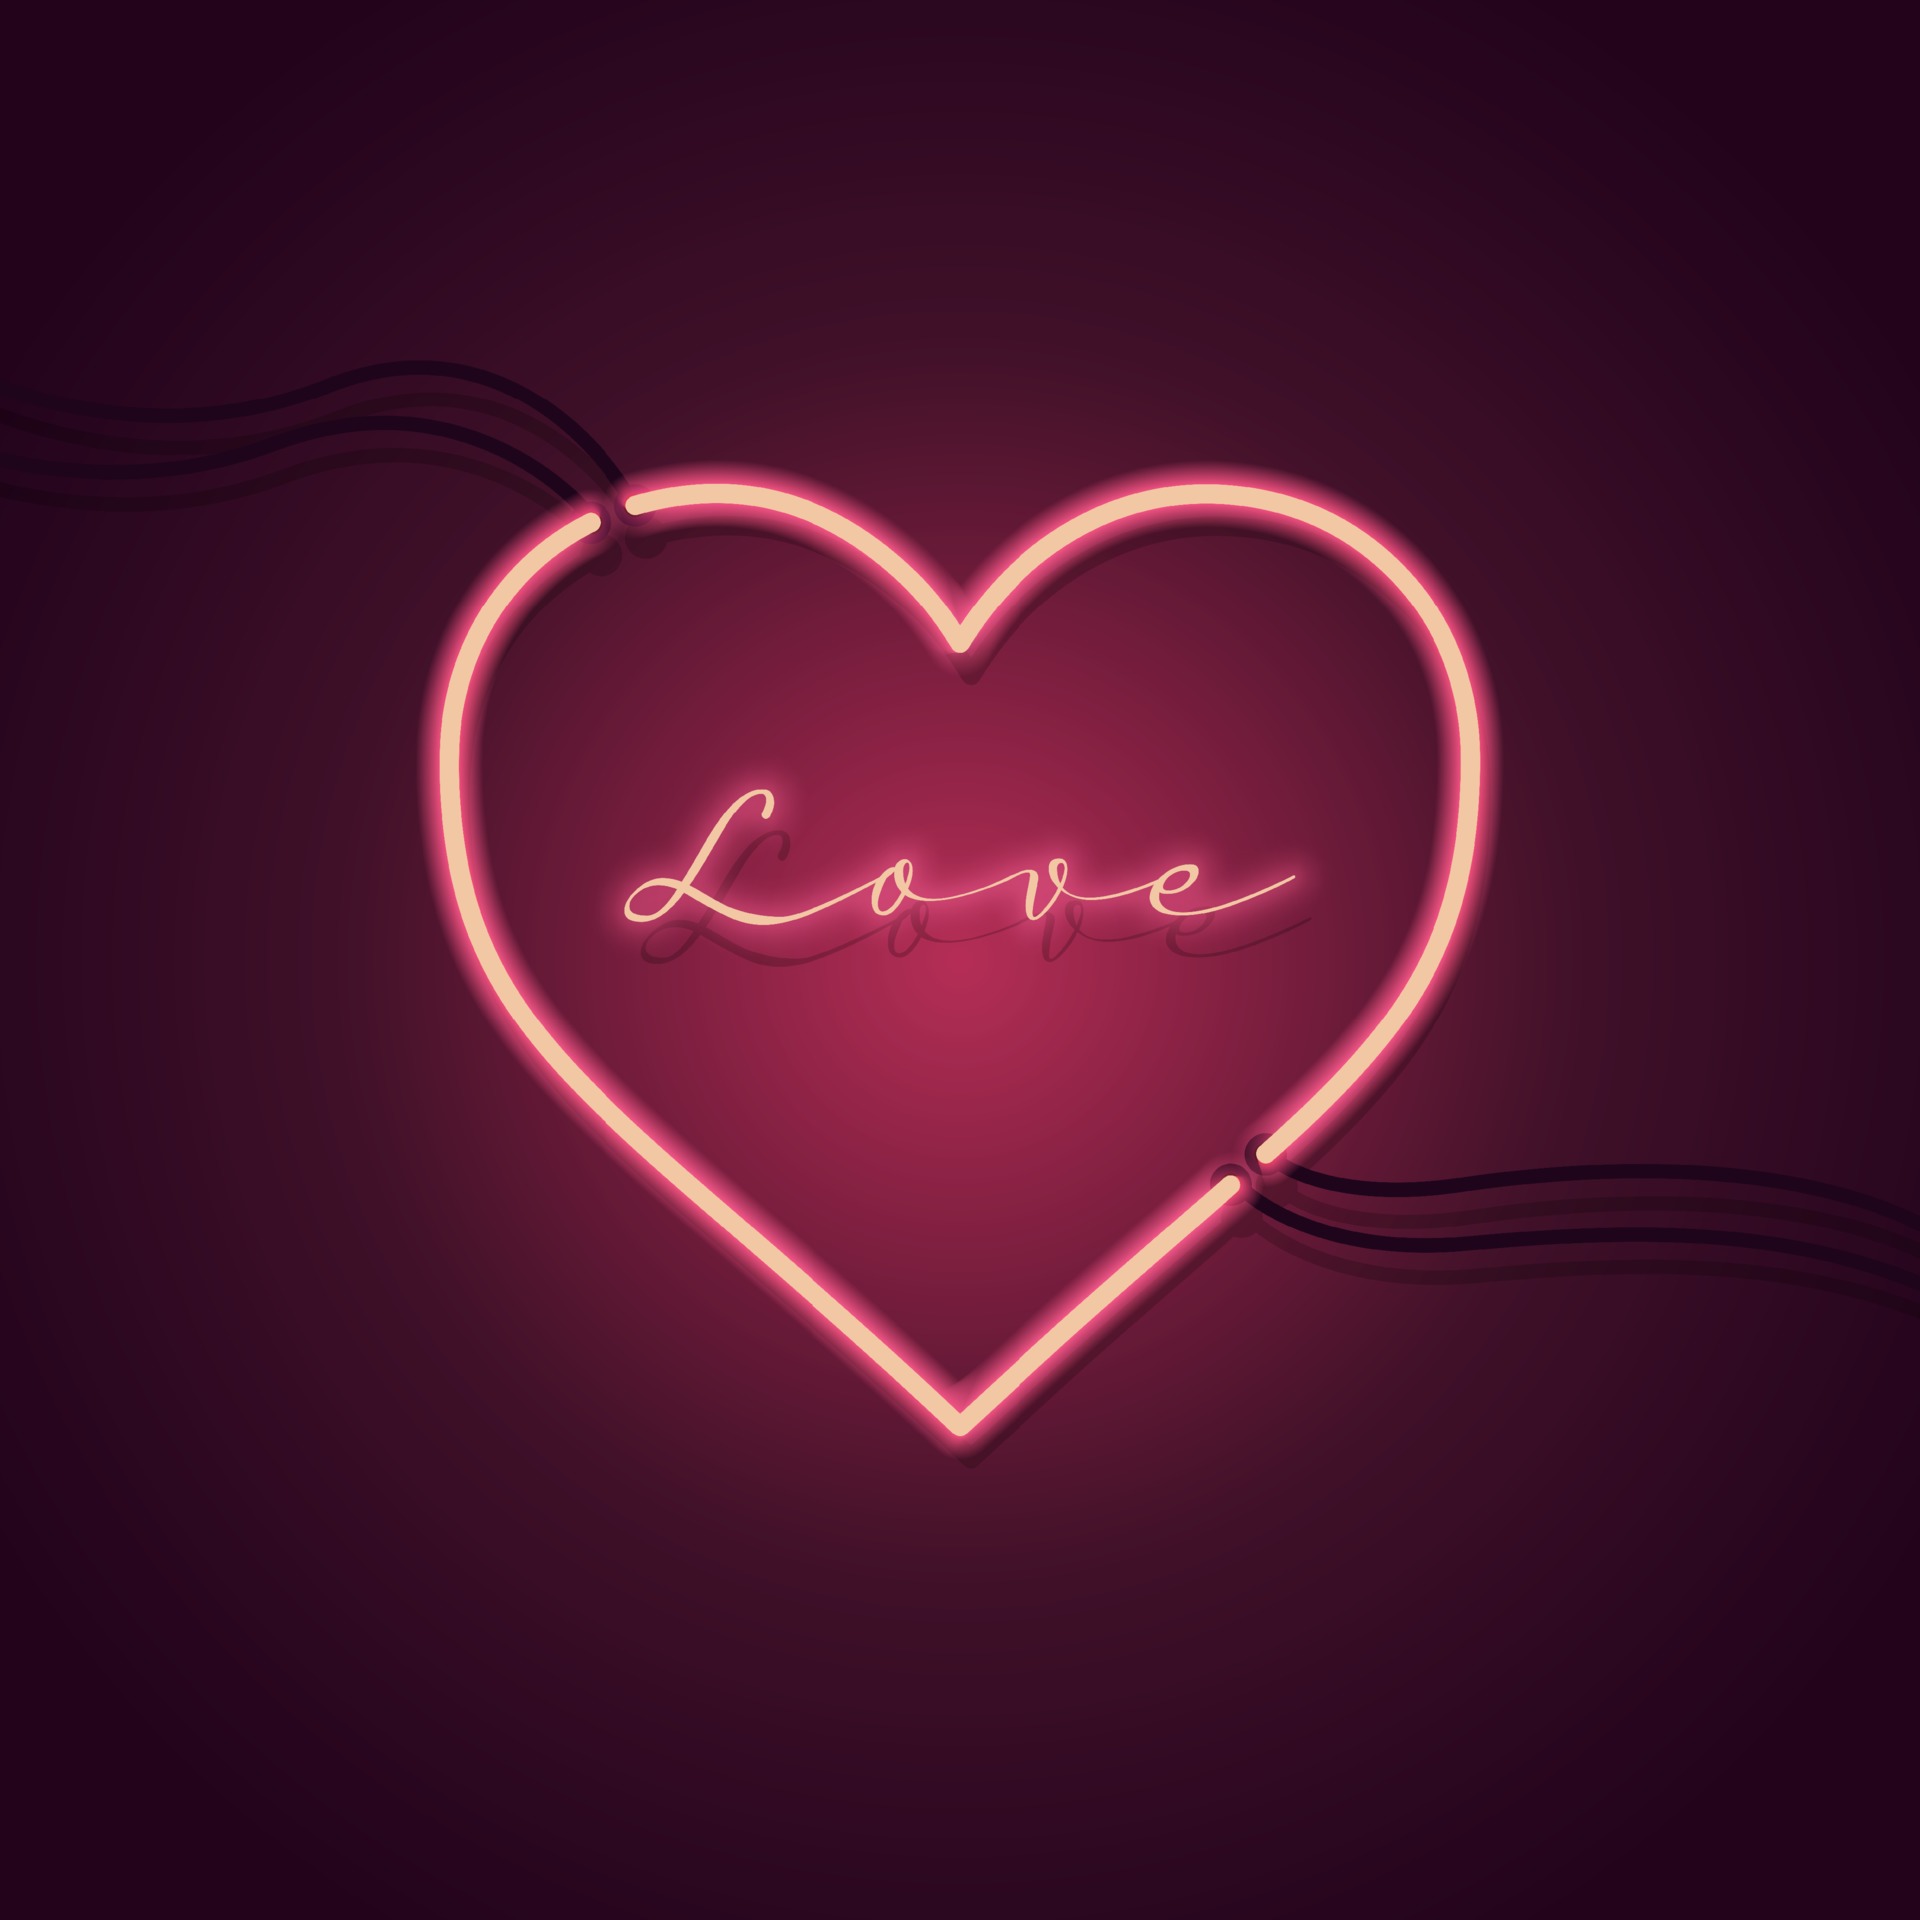 Love and heart neon sign. Neon heart sign on pink background. Design element for Happy Valentine's Day